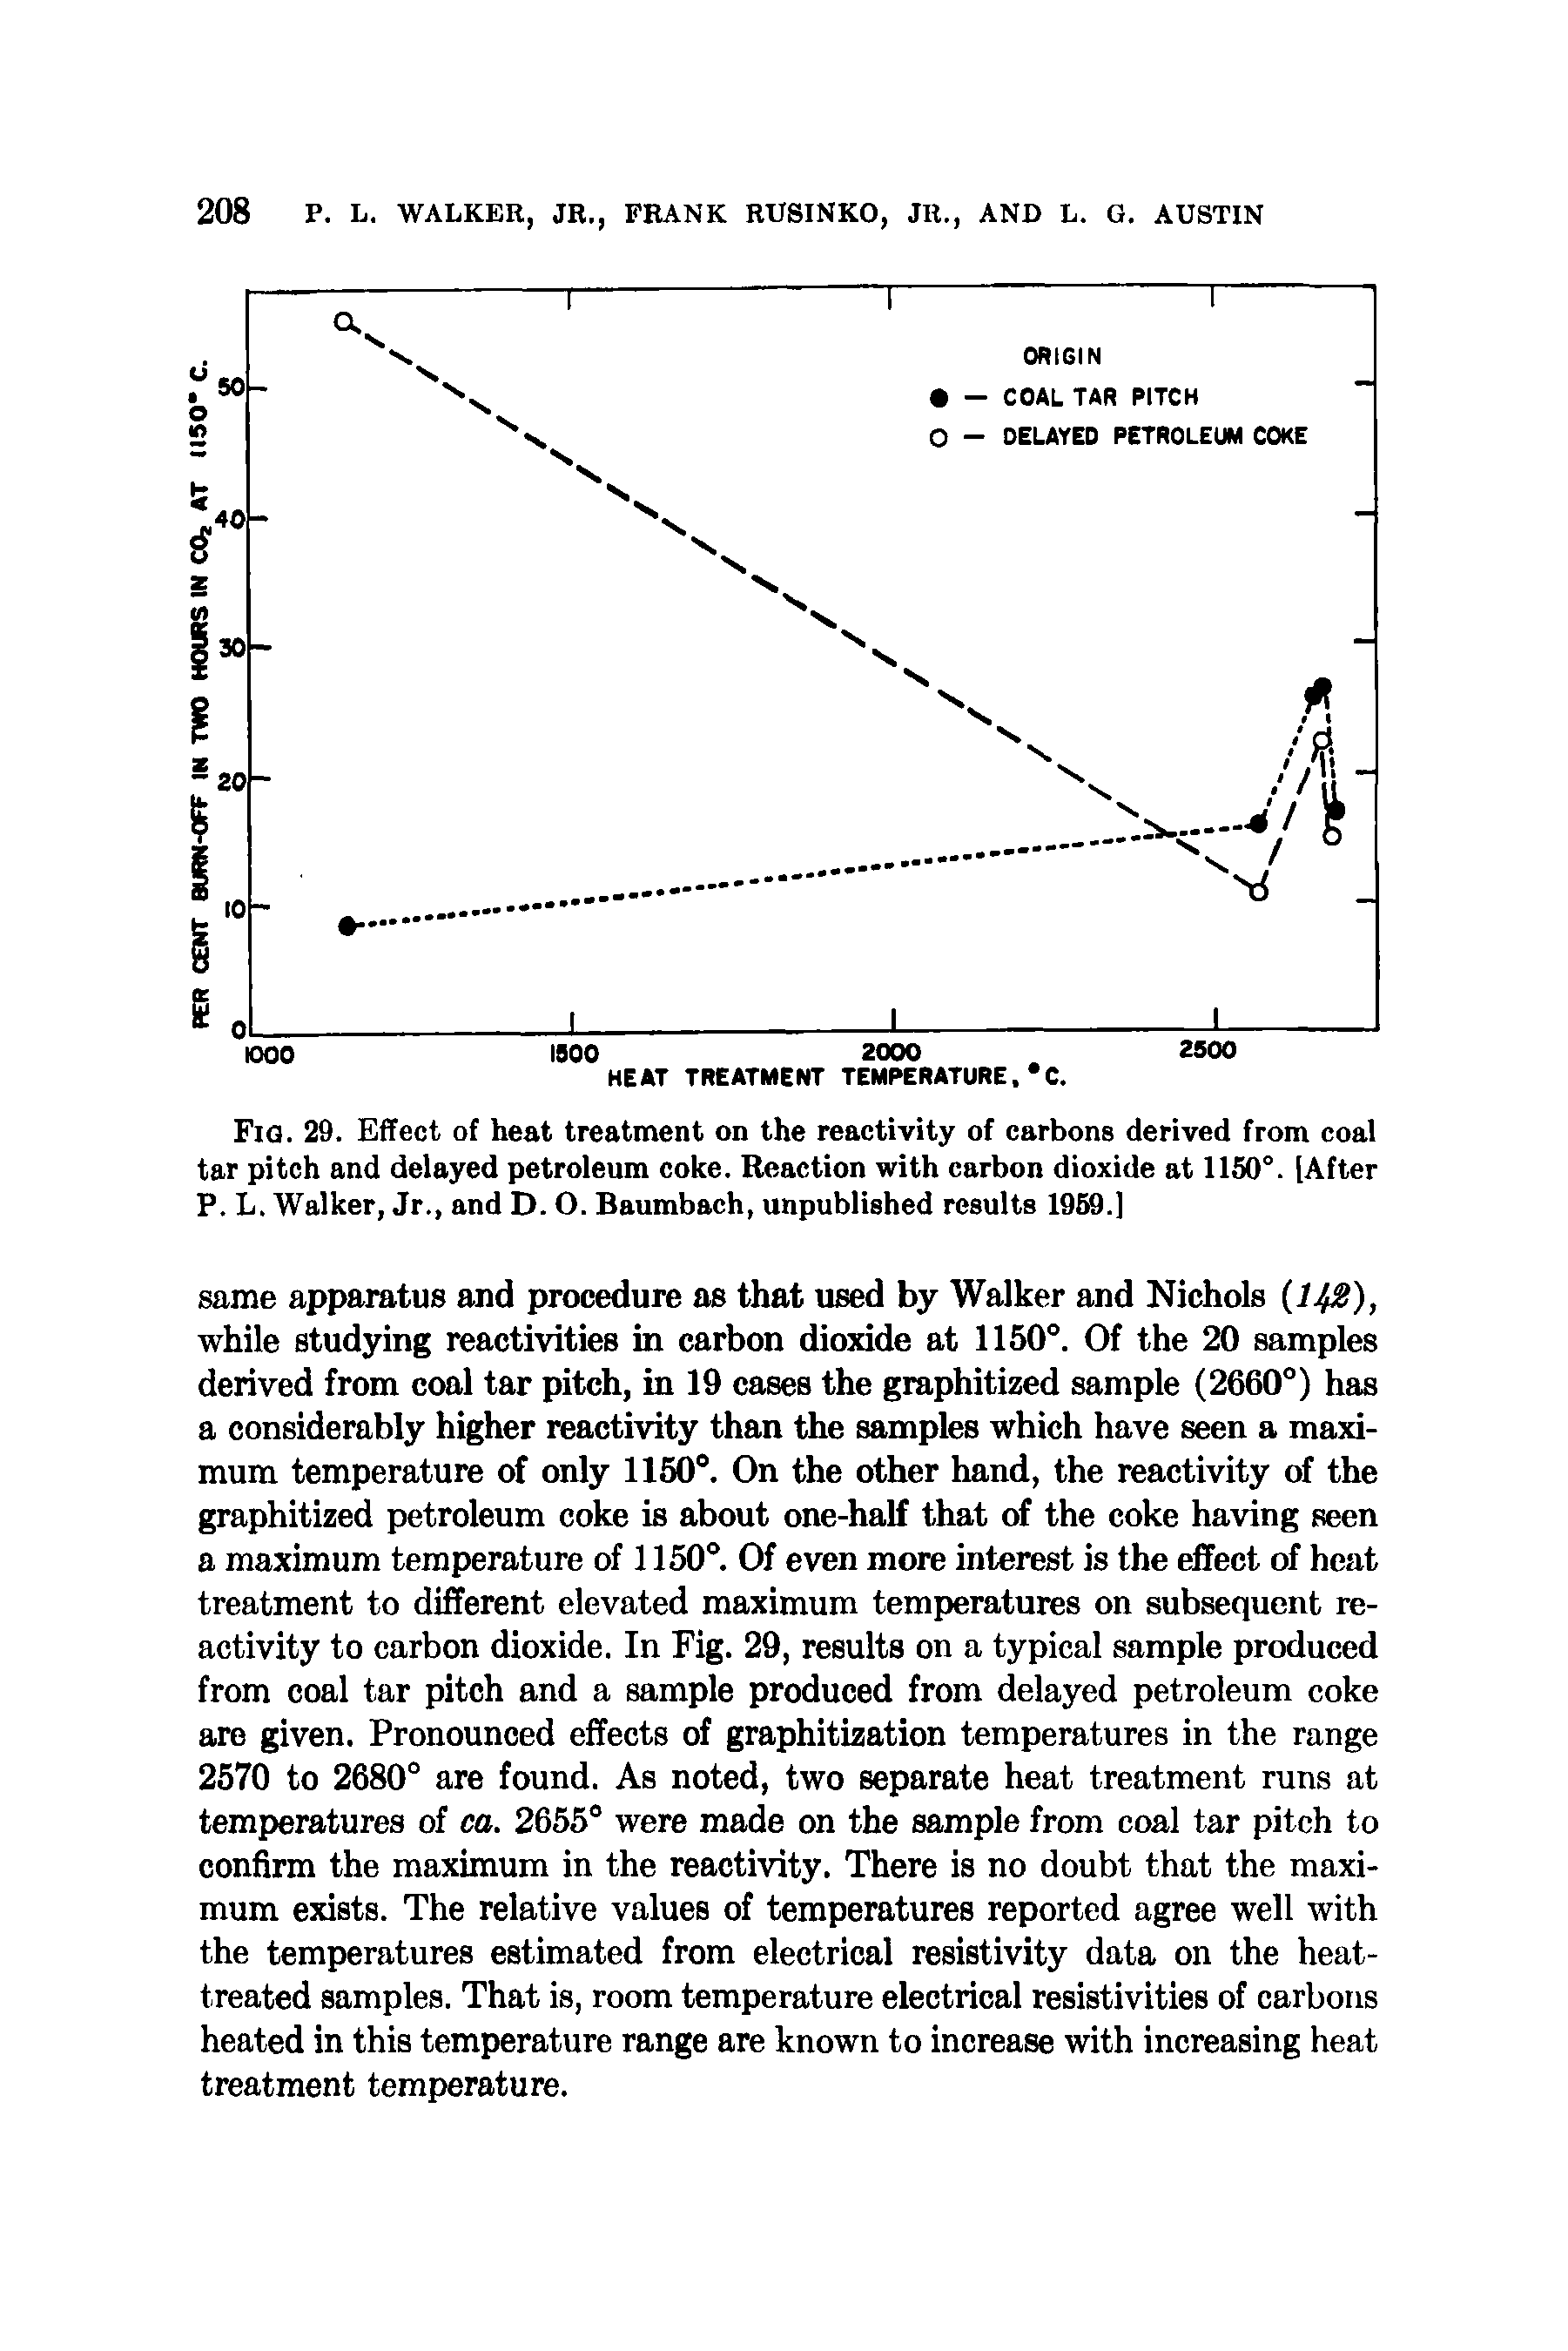 Fig. 29. Effect of heat treatment on the reactivity of carbons derived from coal tar pitch and delayed petroleum coke. Reaction with carbon dioxide at 1150°. [After P. L. Walker, Jr., and D. O. Baumbach, unpublished results 1969.]...